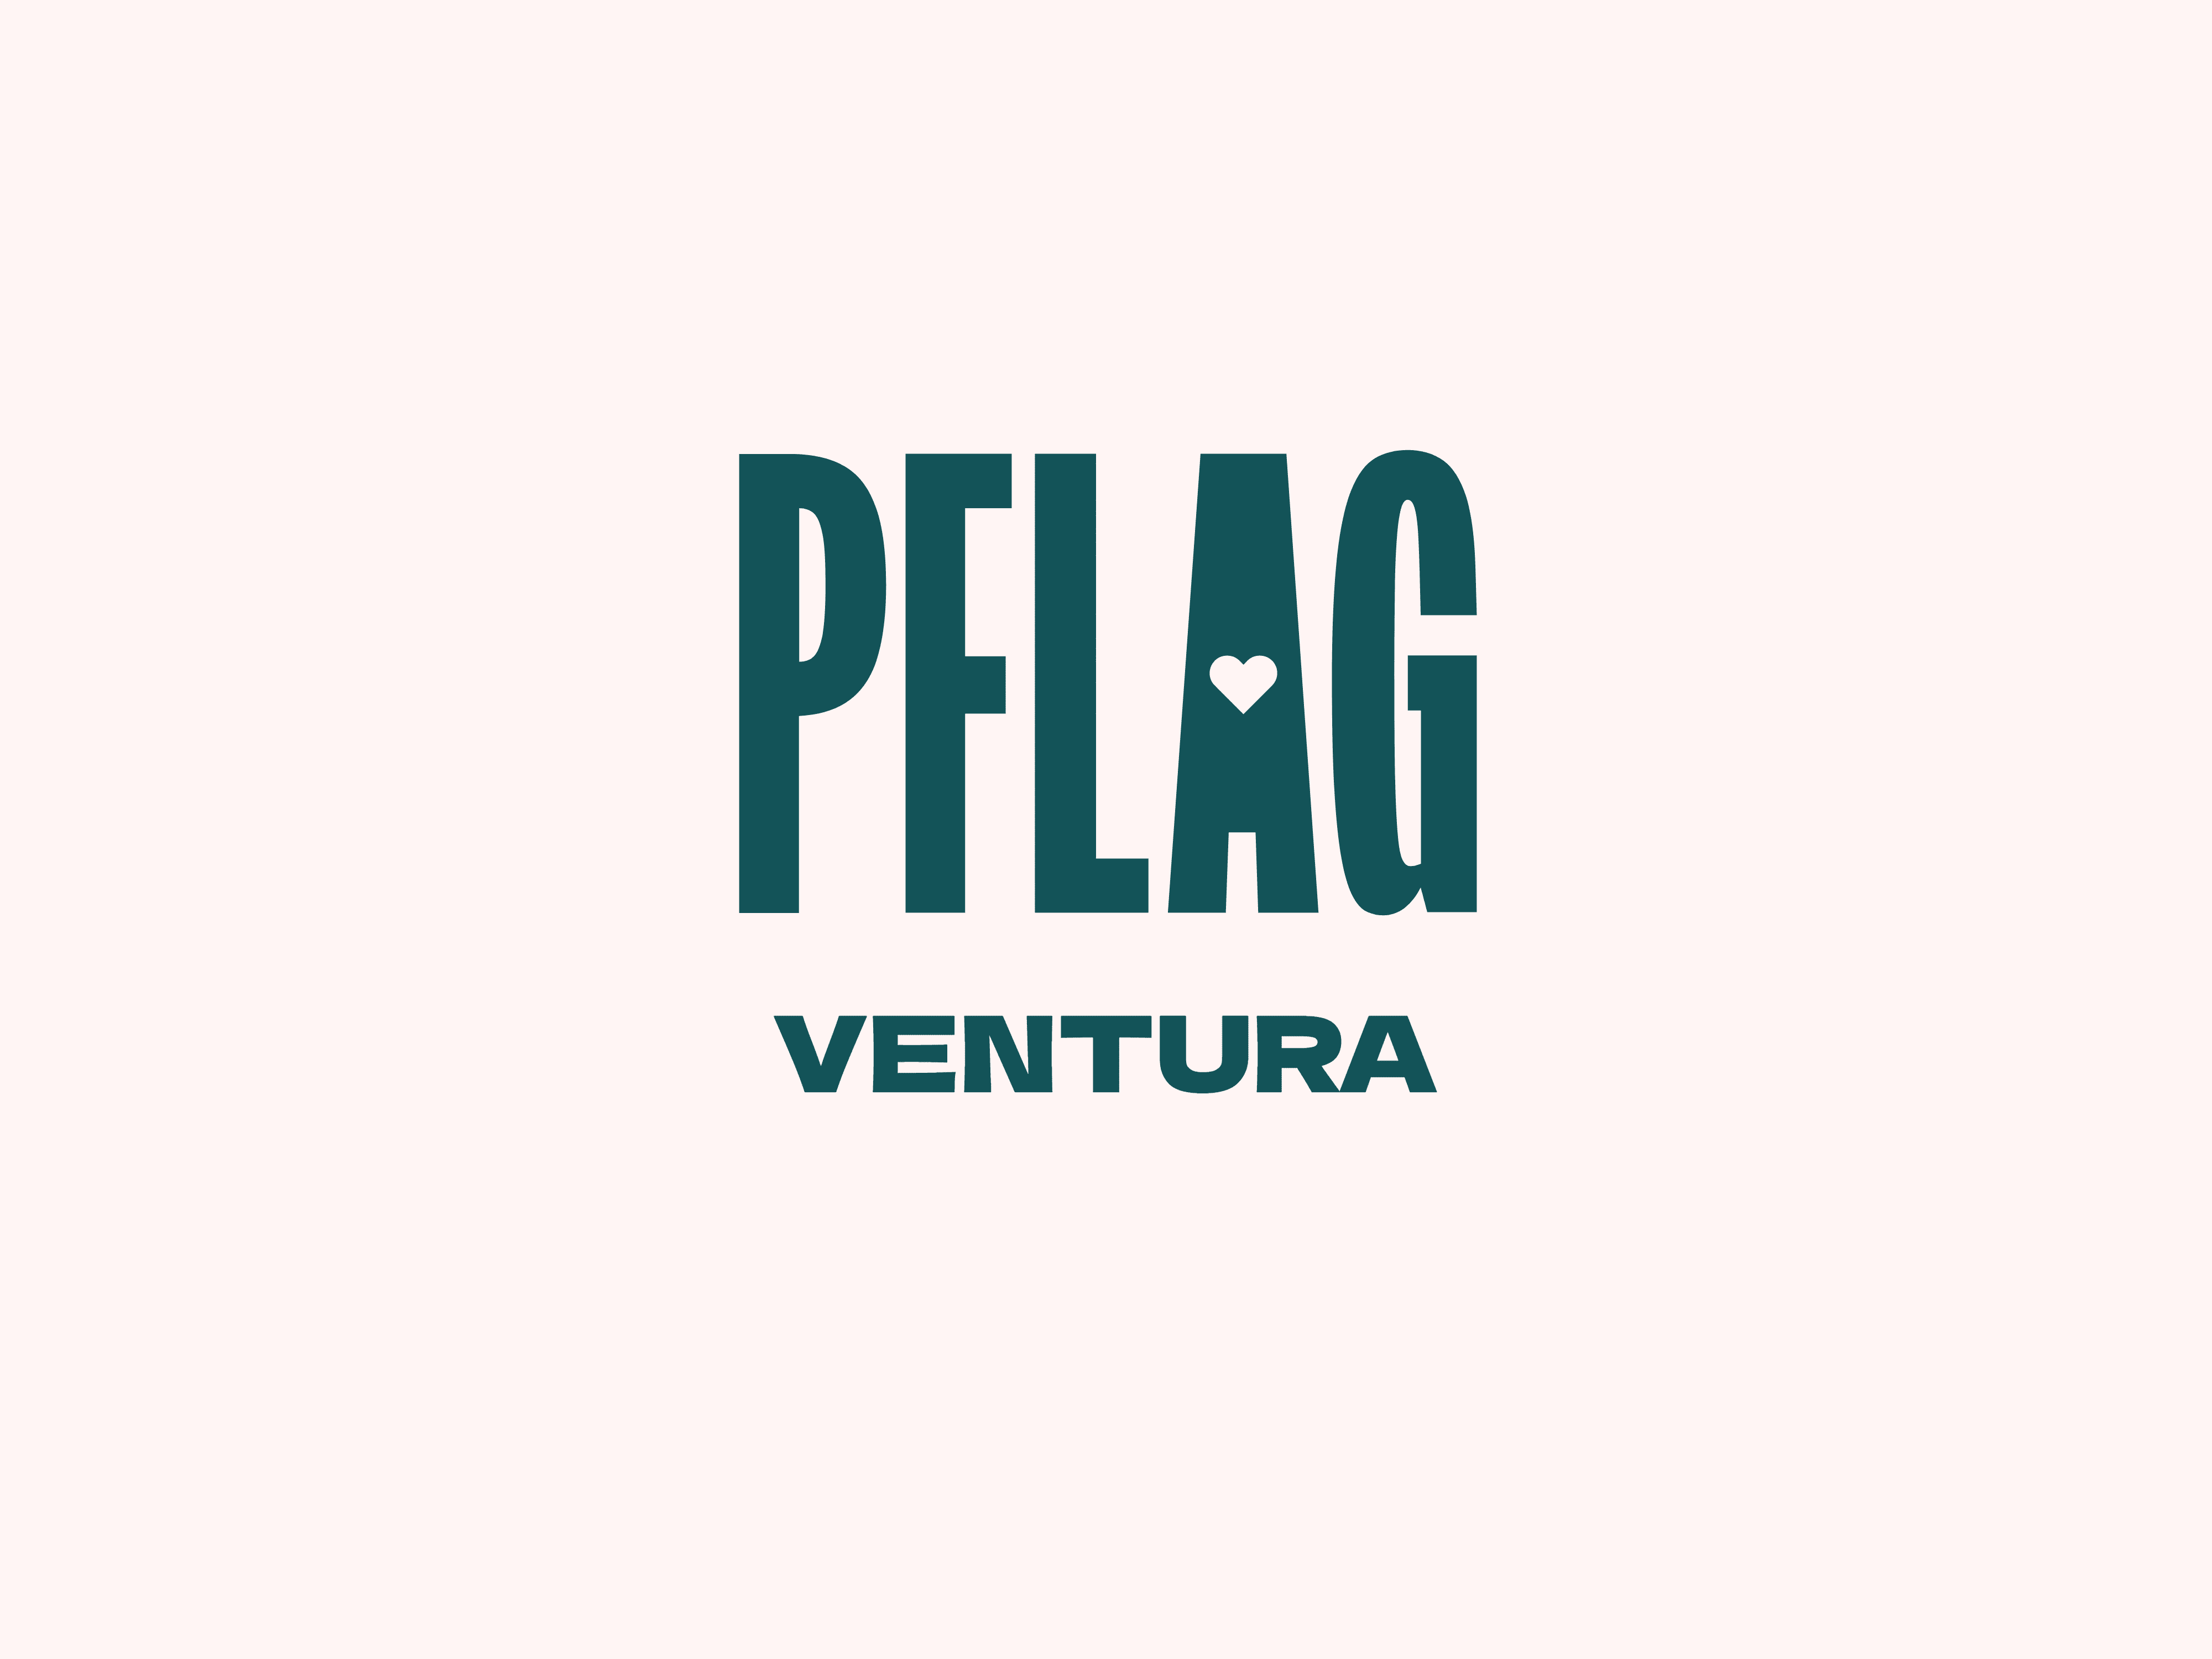 Logo of pflag ventura, featuring the organization's name with a heart design between 'pflag' and 'ventura.'.